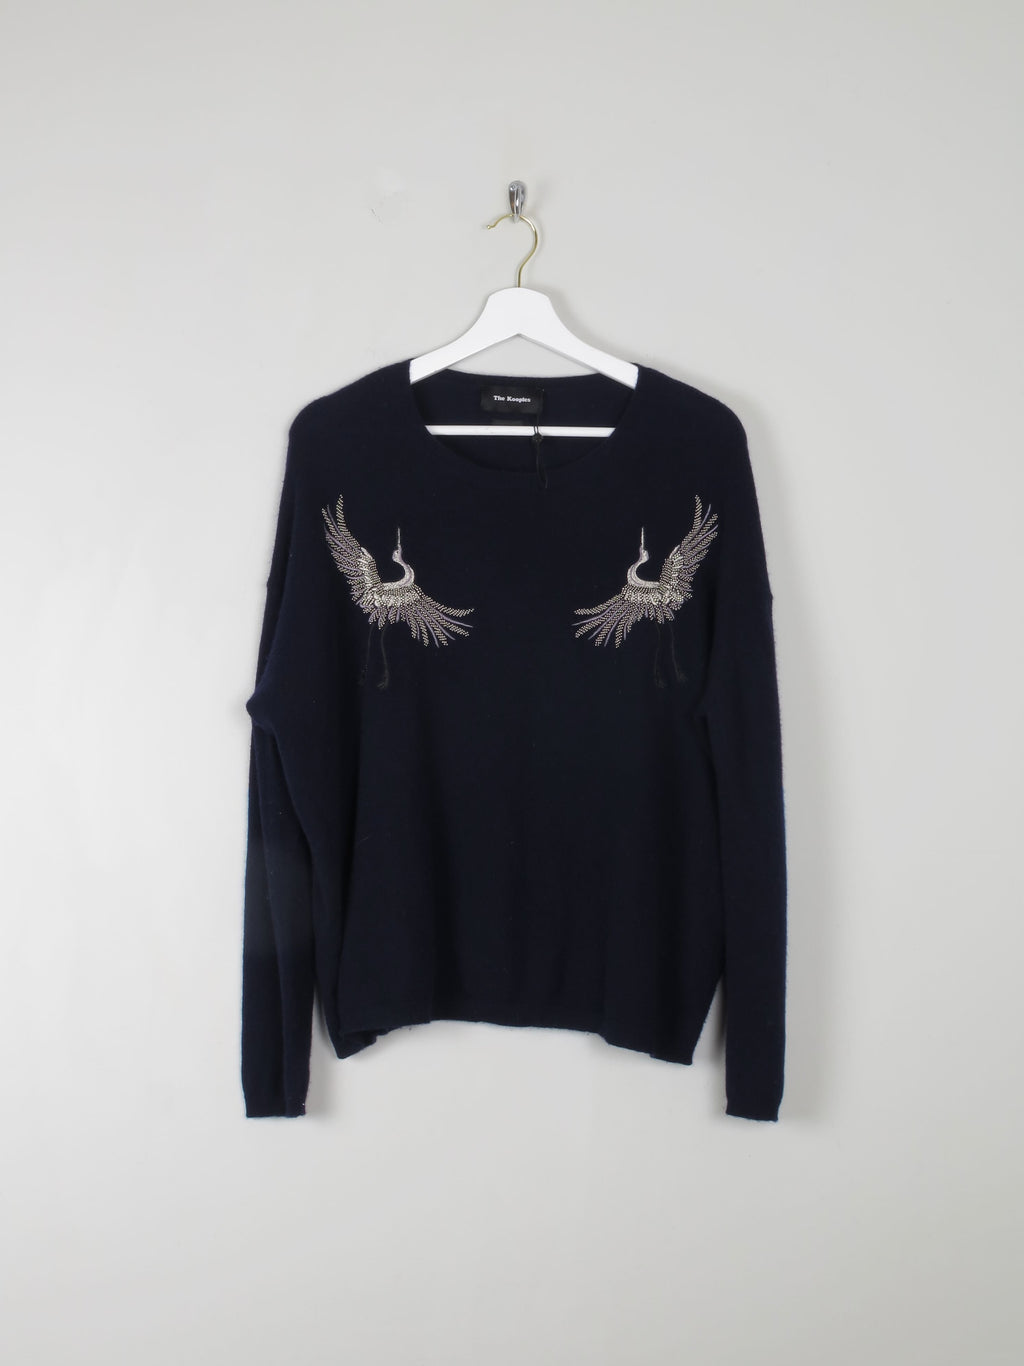 Women's Navy Cashmere Embroidered Jumper By Kooples M/L